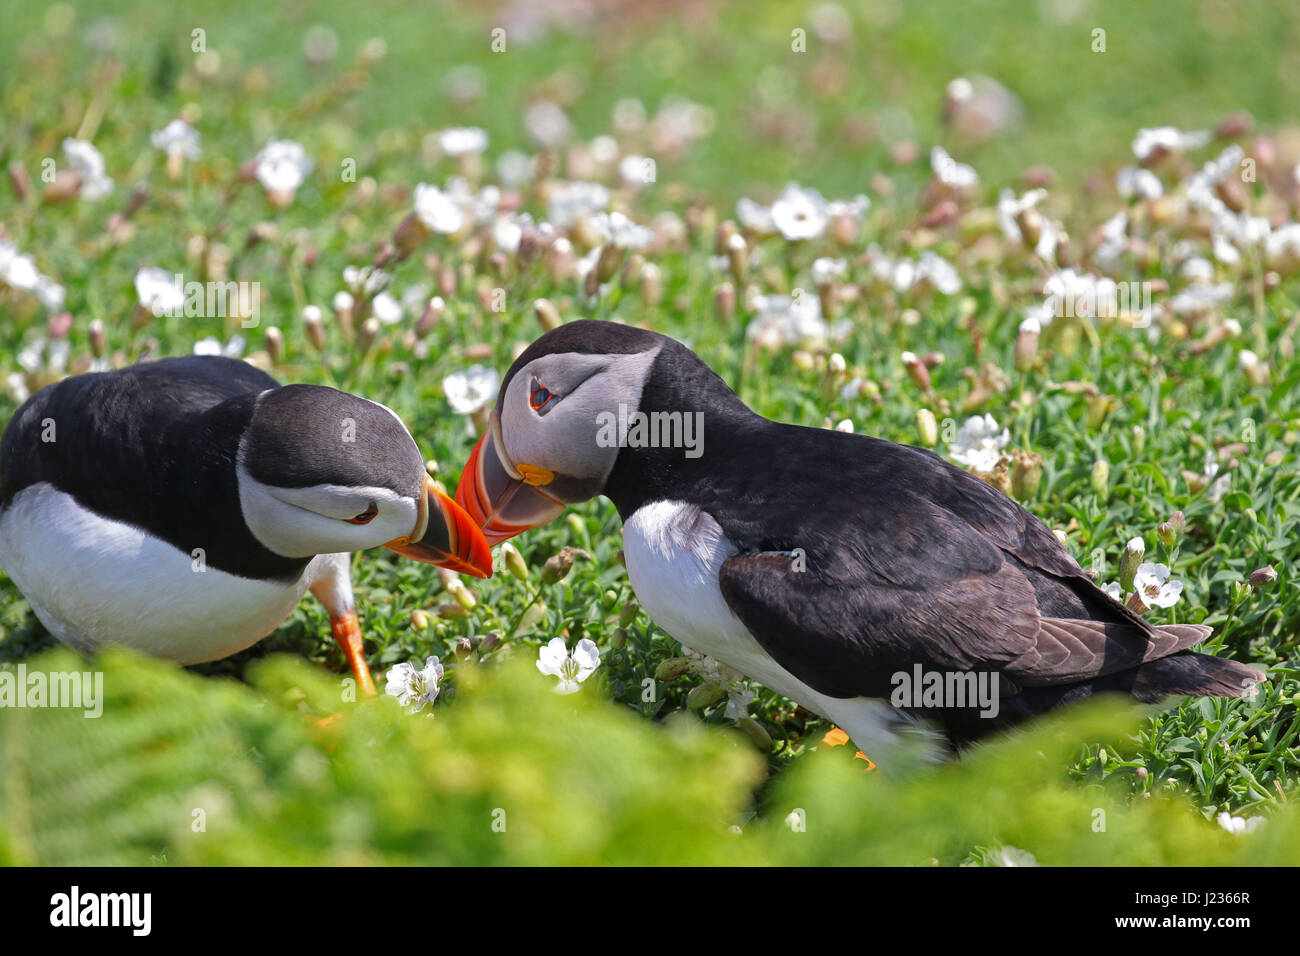 Puffins courtship display at Skoma Island, South West Wales UK Stock Photo